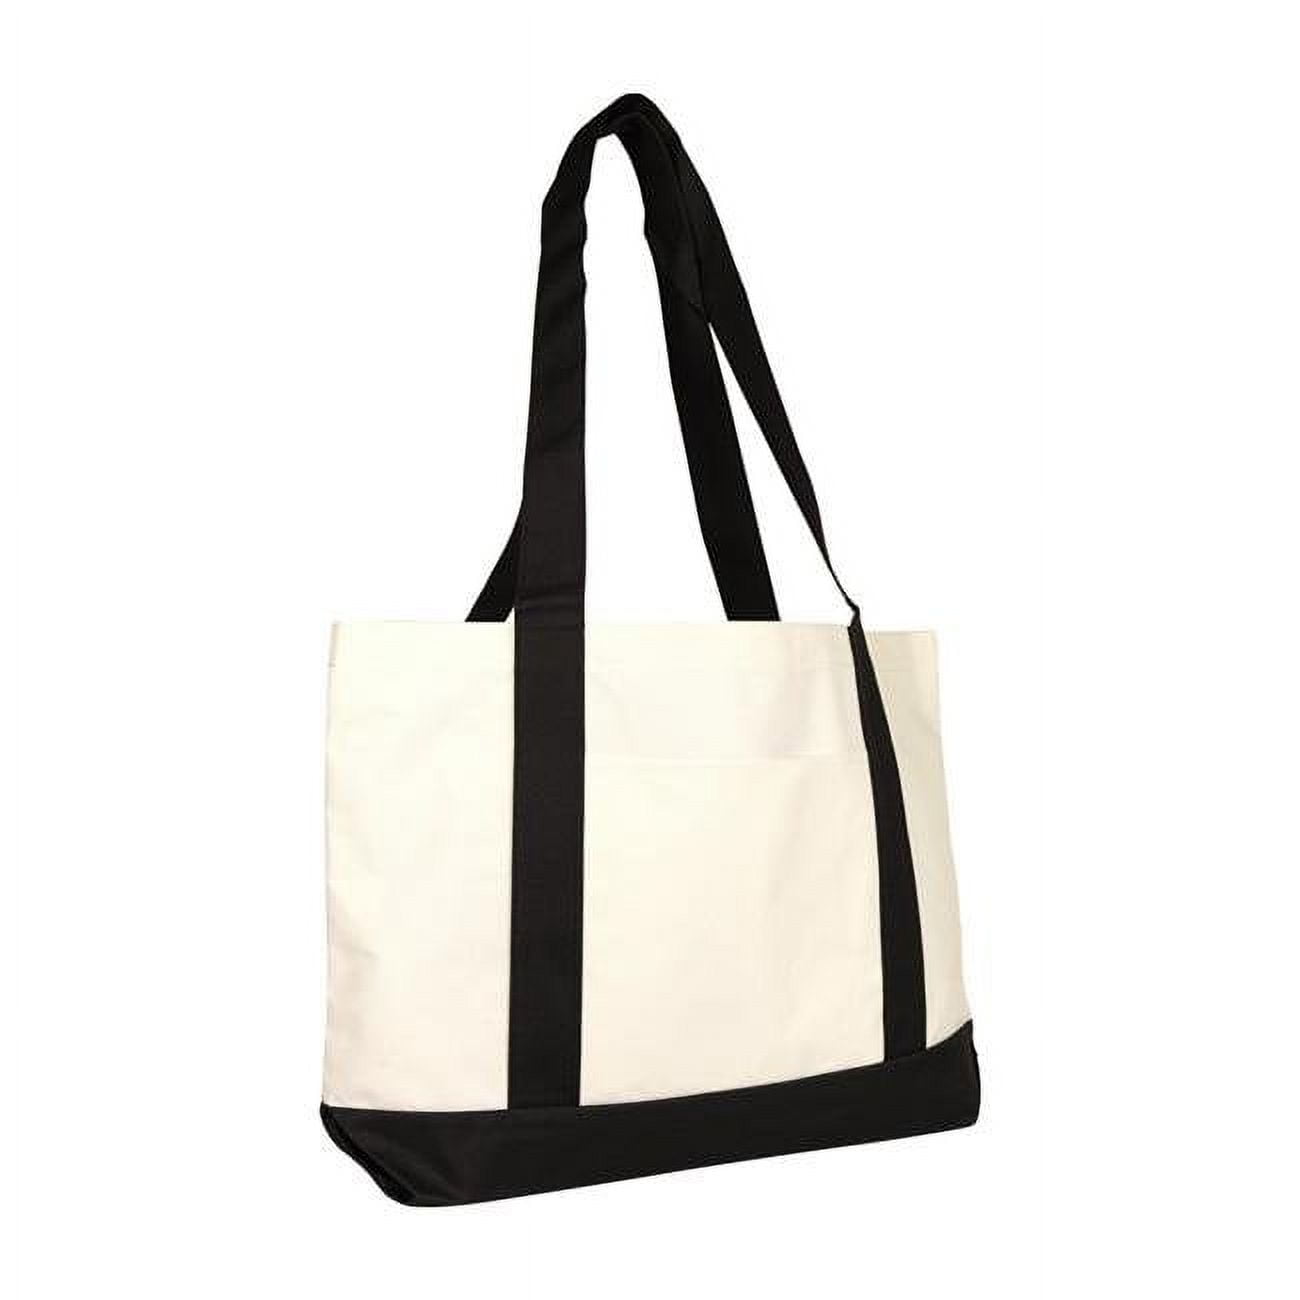 600d Poly Shopping Tote, Black & White - Case Of 48